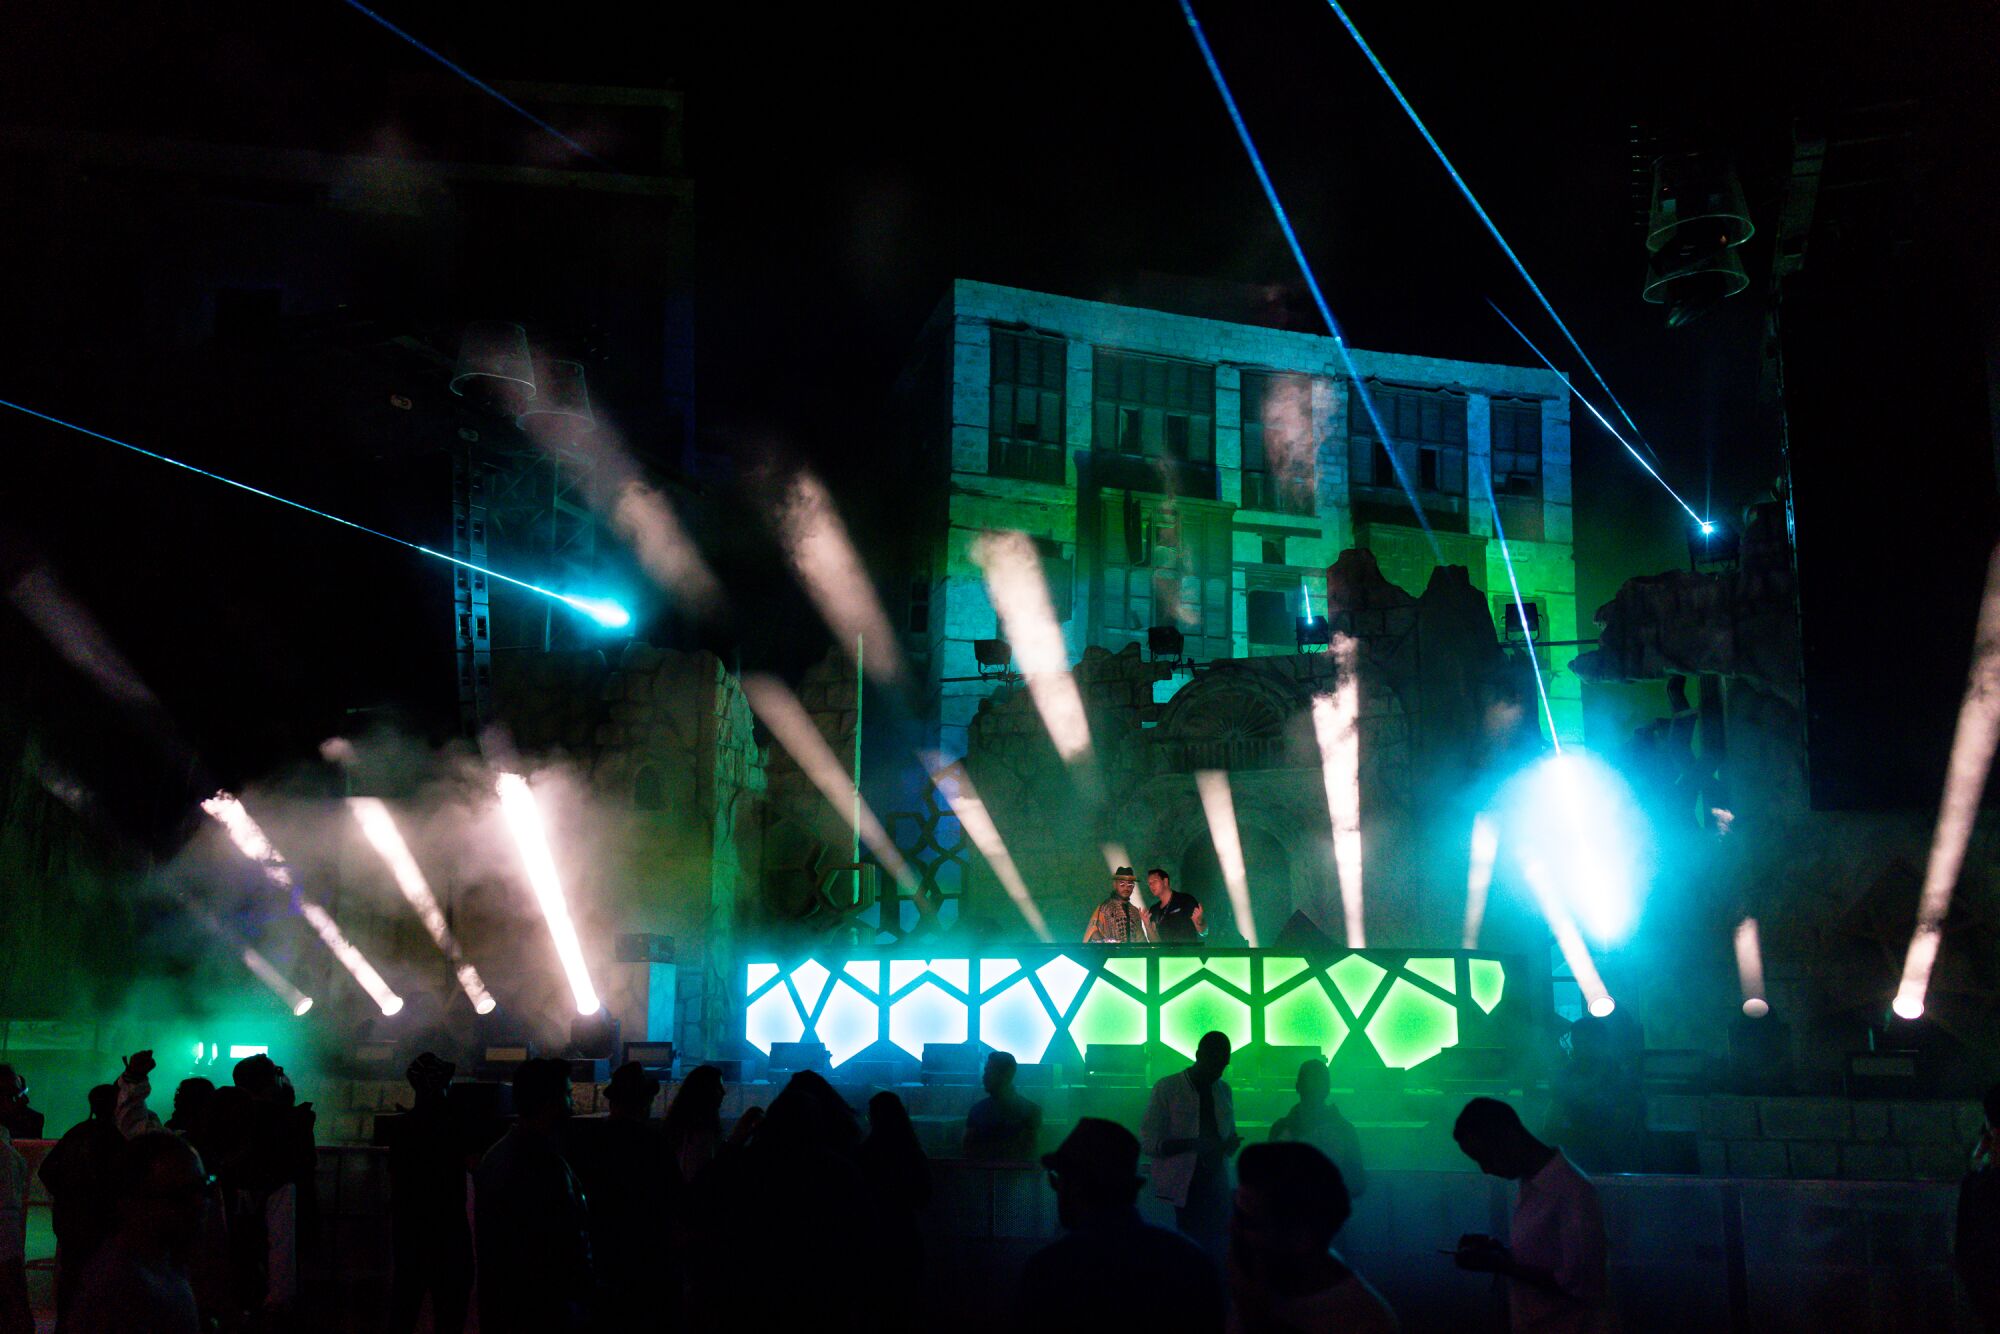 Light show on a green and blue stage at a night rave.